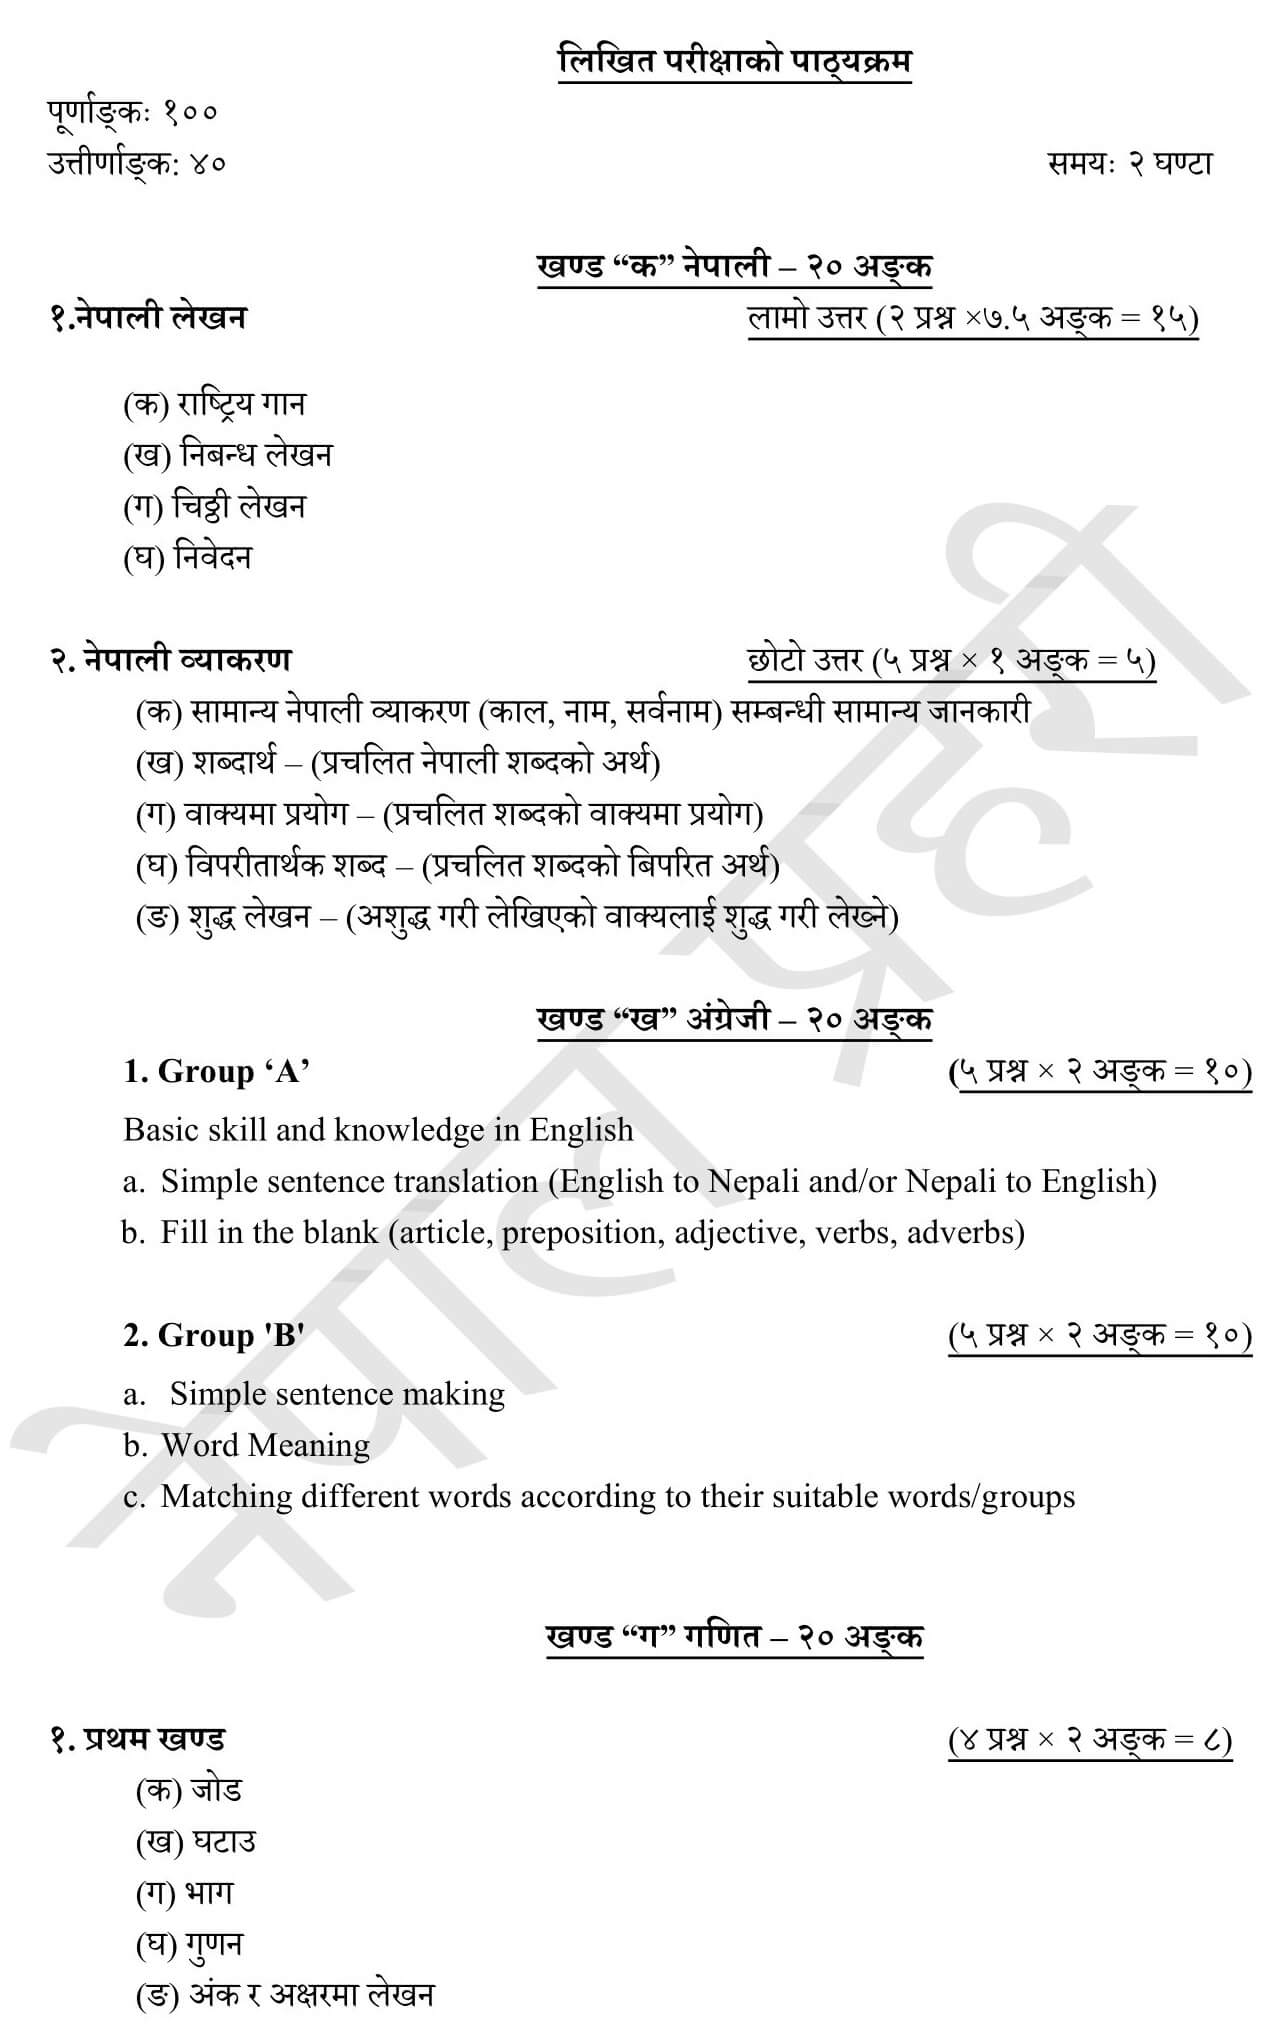 Syllabus of Nepal Police Technical Constable - Canine. Nepal Police:  Police Constable (Technical) Exam Syllabus. Nepal Police Technical Police Constable (Canine) Syllabus